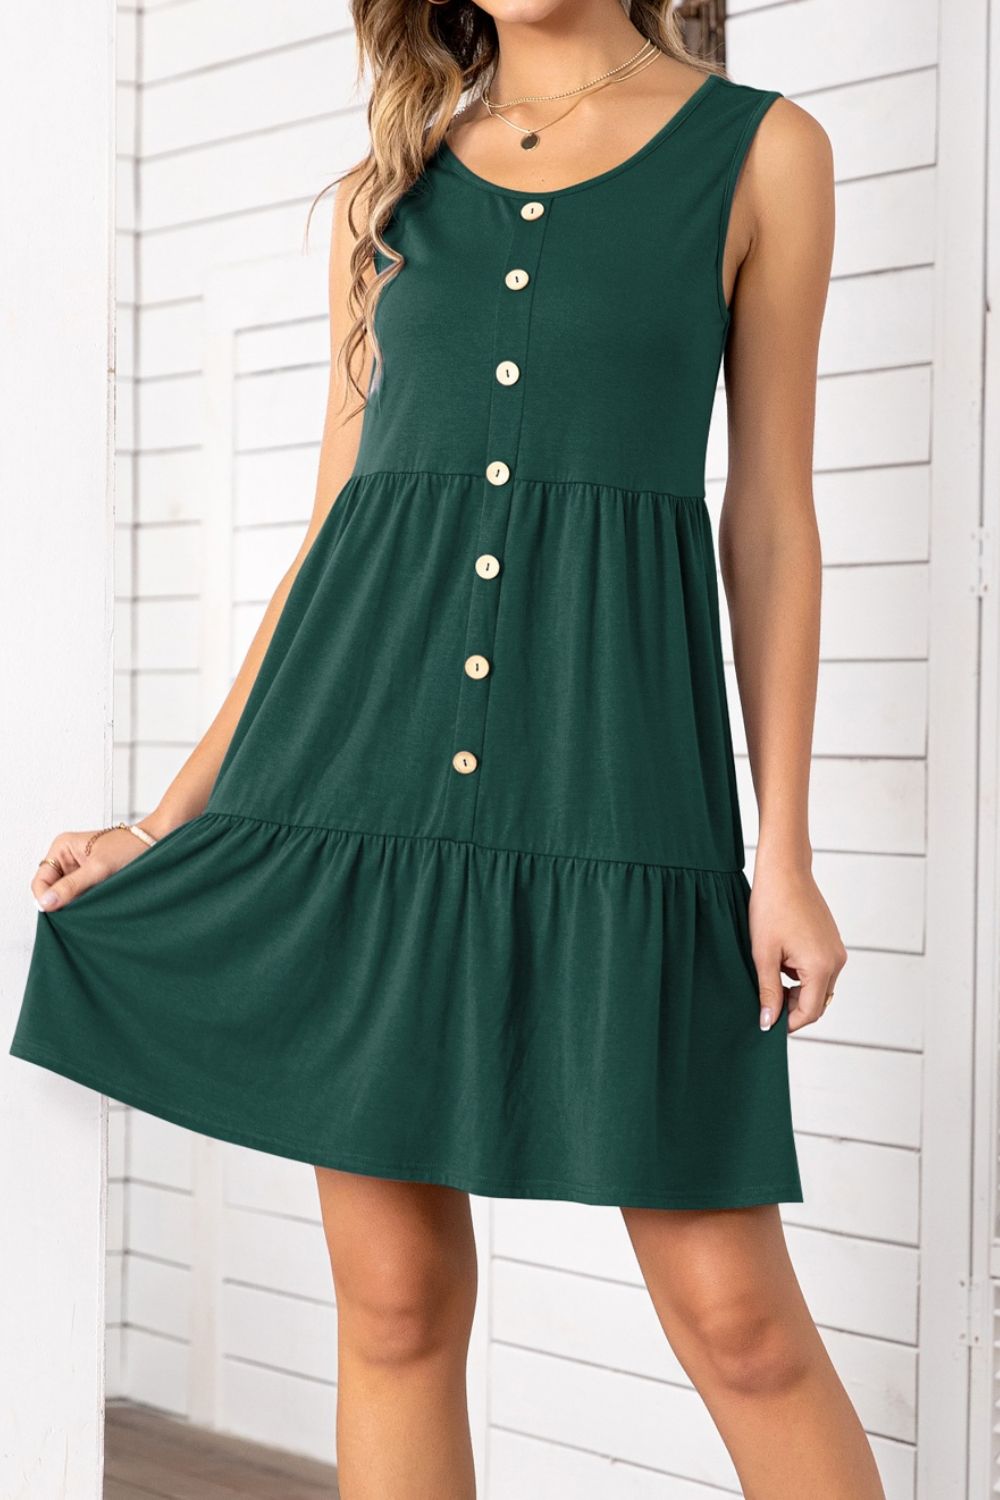 Button Scoop Neck Sleeveless Tiered Dress | Online Boutiques For Dresses - Alaena James Boutique